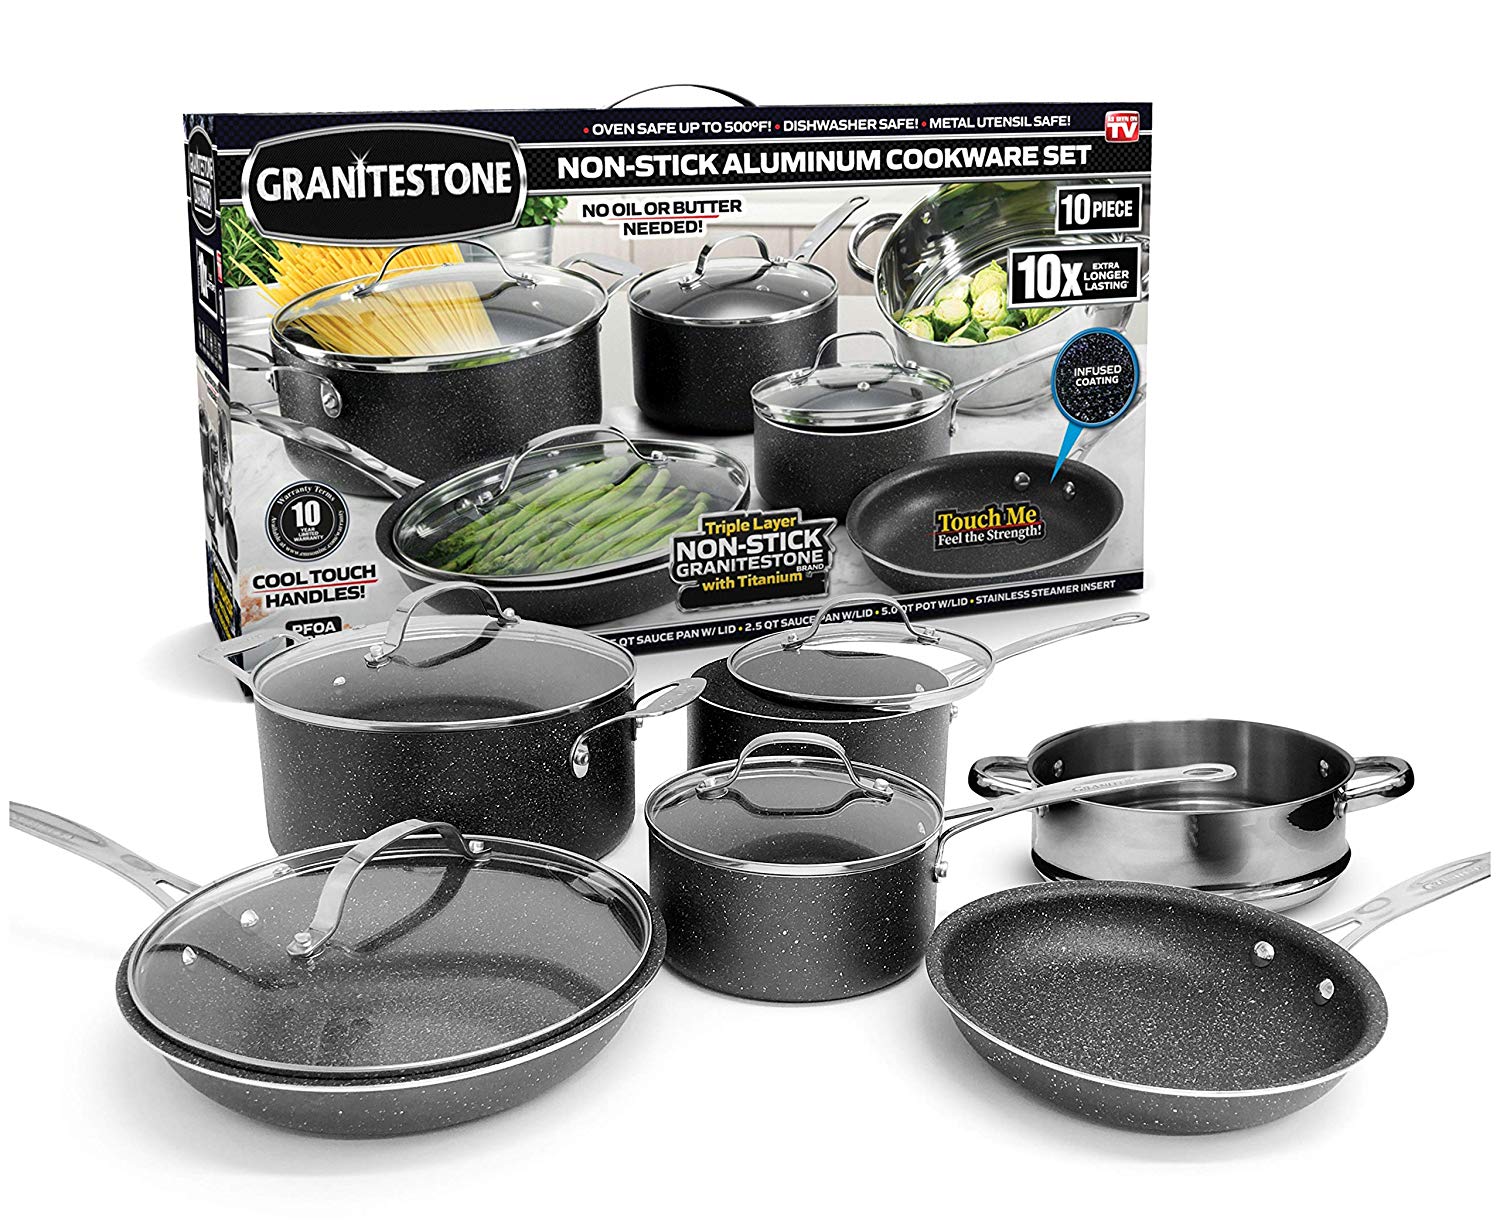 Granite Stone Pots and Pans Set, 10 Piece Nonstick Cookware Set, Includes Steamer, Scratch Resistant, Granite Coated, Dishwasher and Oven-Safe, PFOA-Free, Black - image 3 of 11